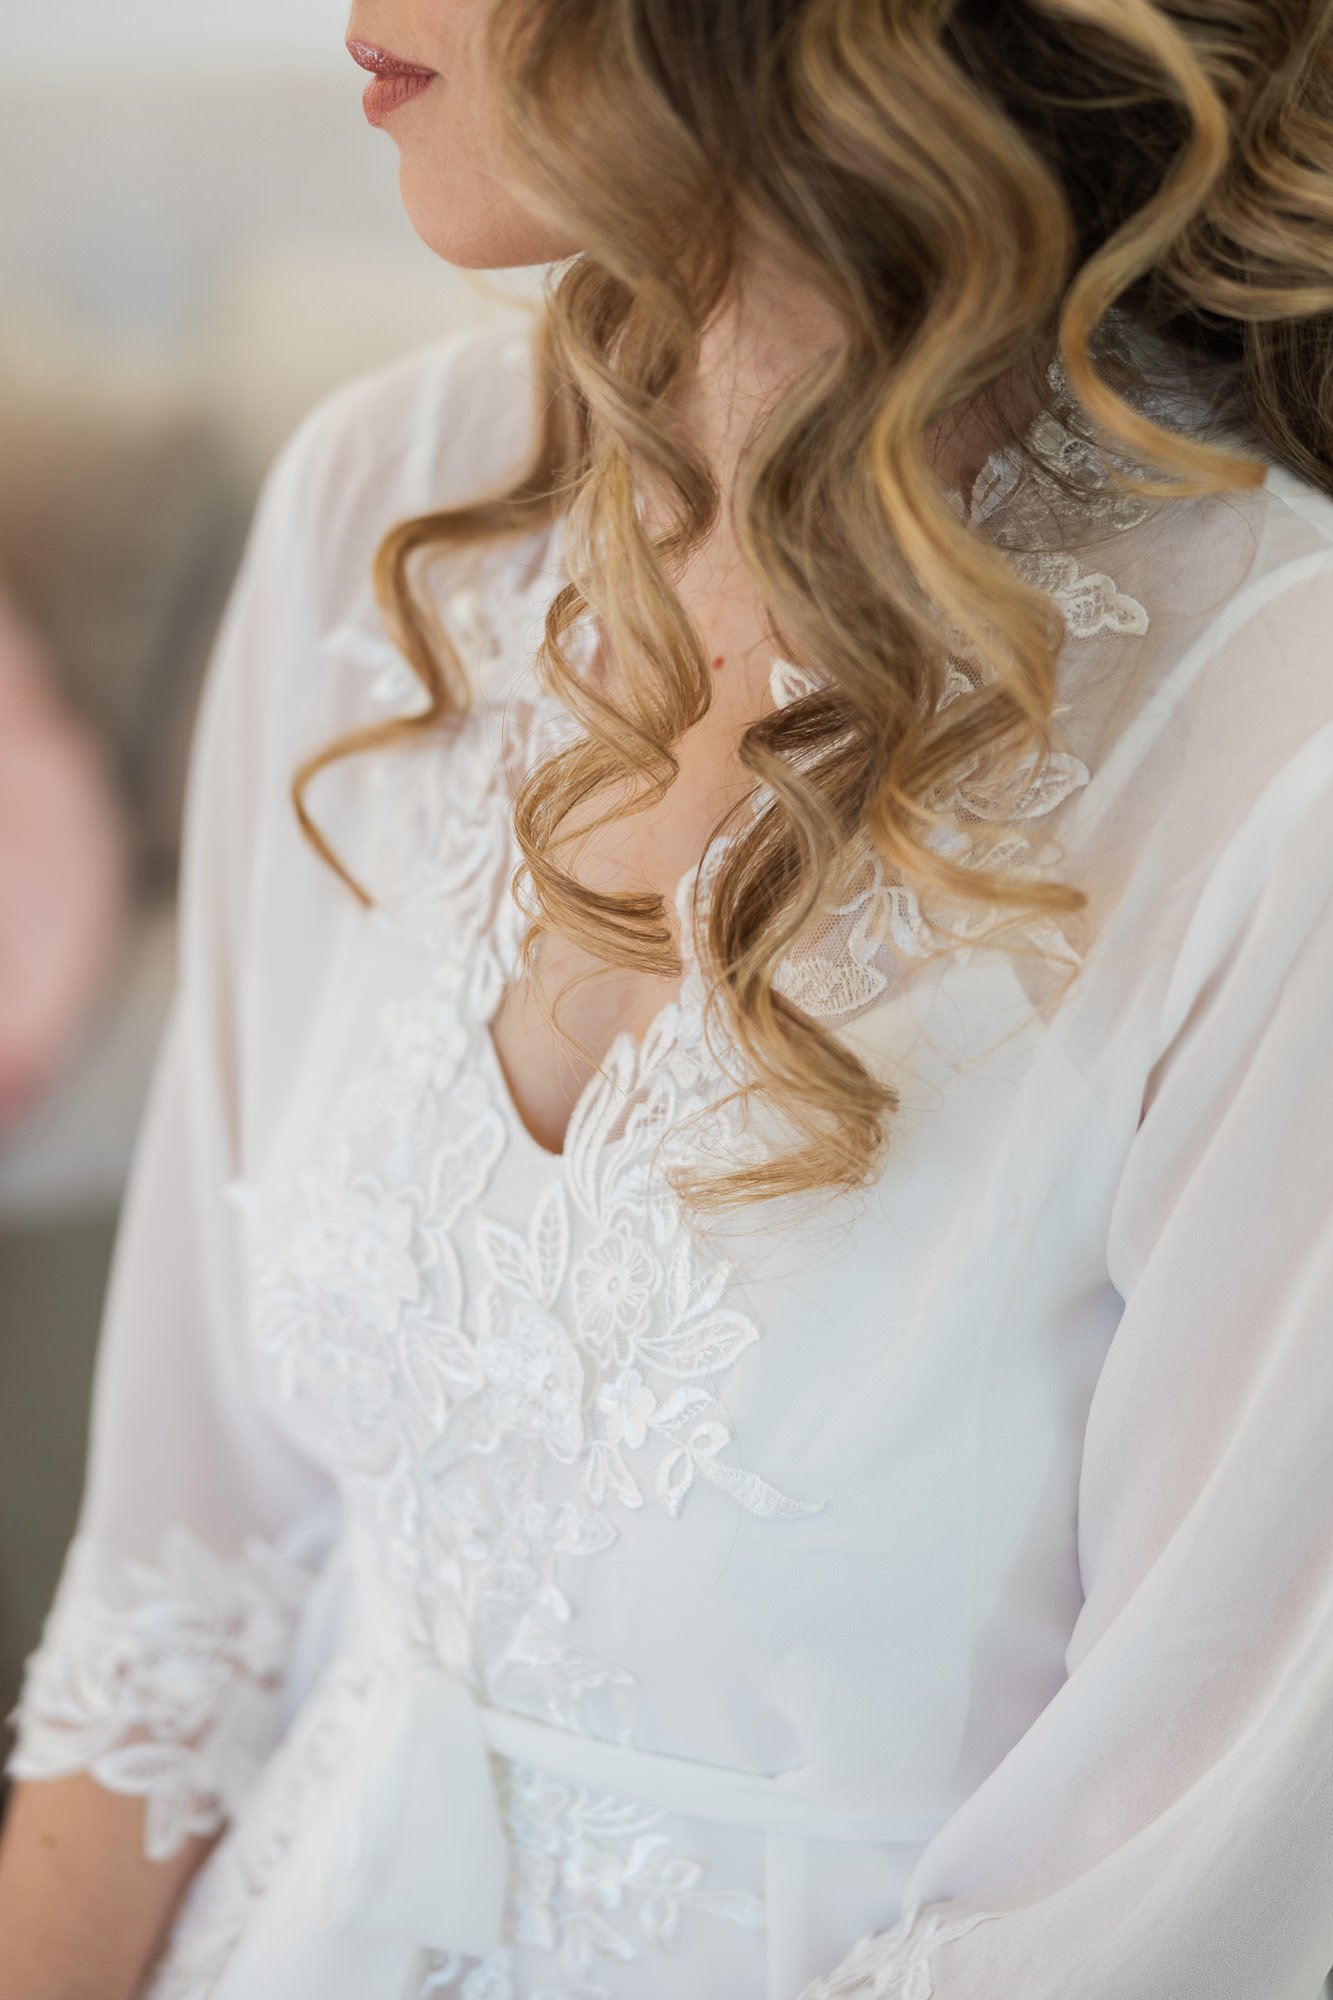 womans hair falls in ringlets onto her shoulders clothed in white lacey dress